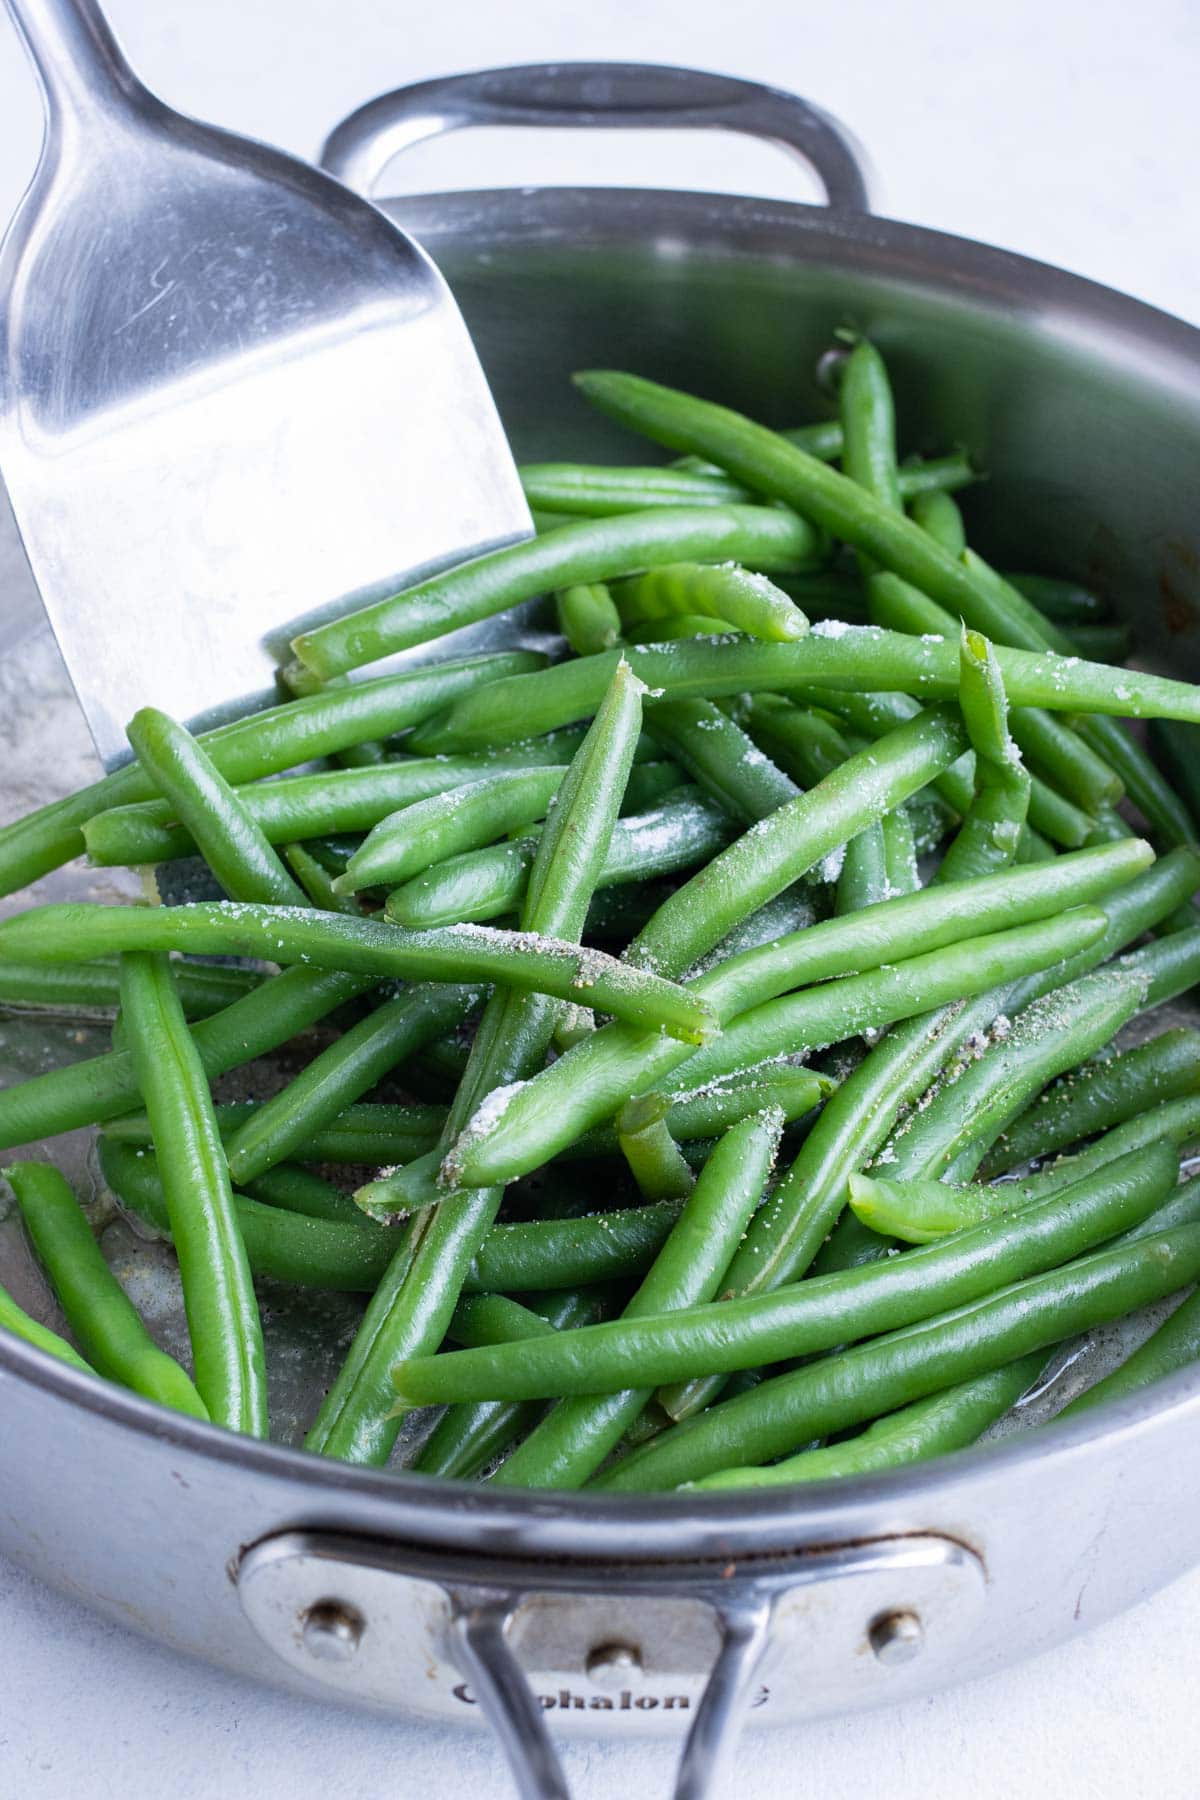 Boiled green beans are added to the garlic butter on the stove.